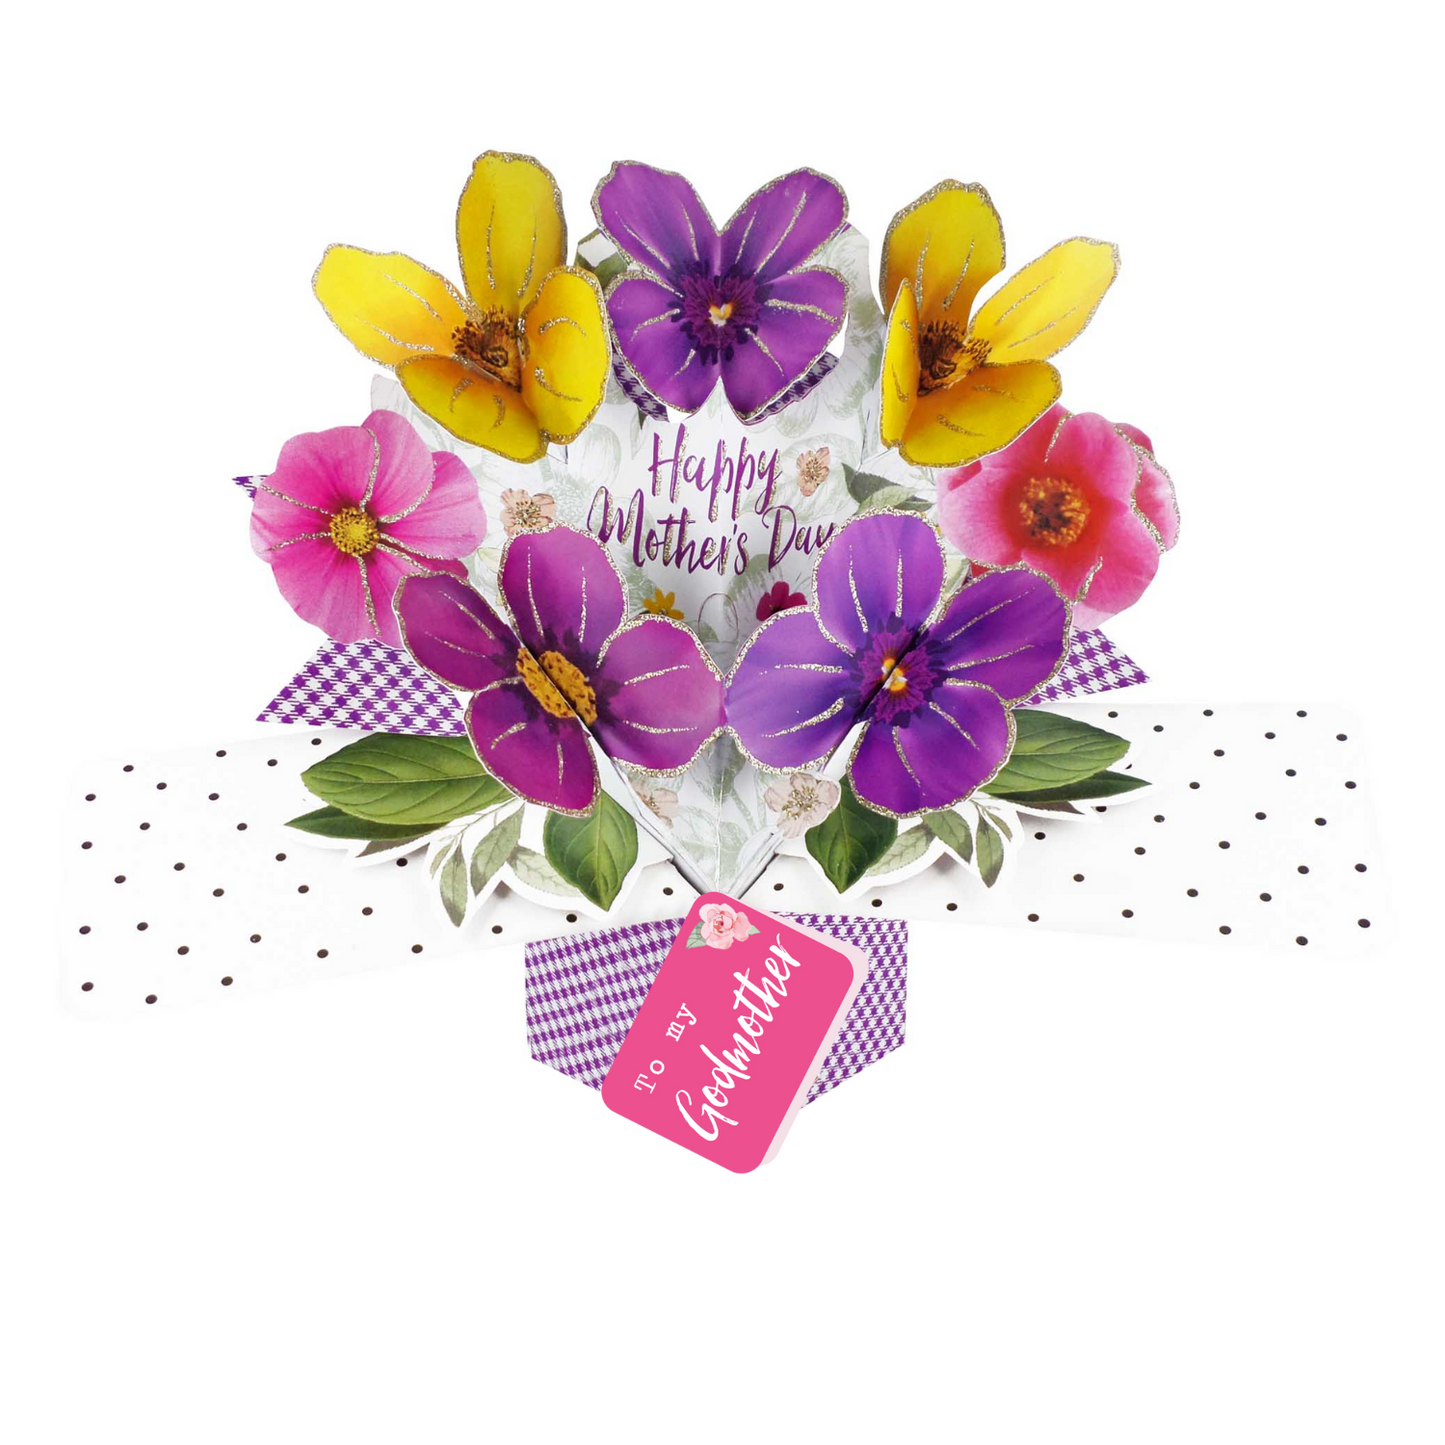 Happy Mother's Day To My Godmother Pansies Pop Up Card